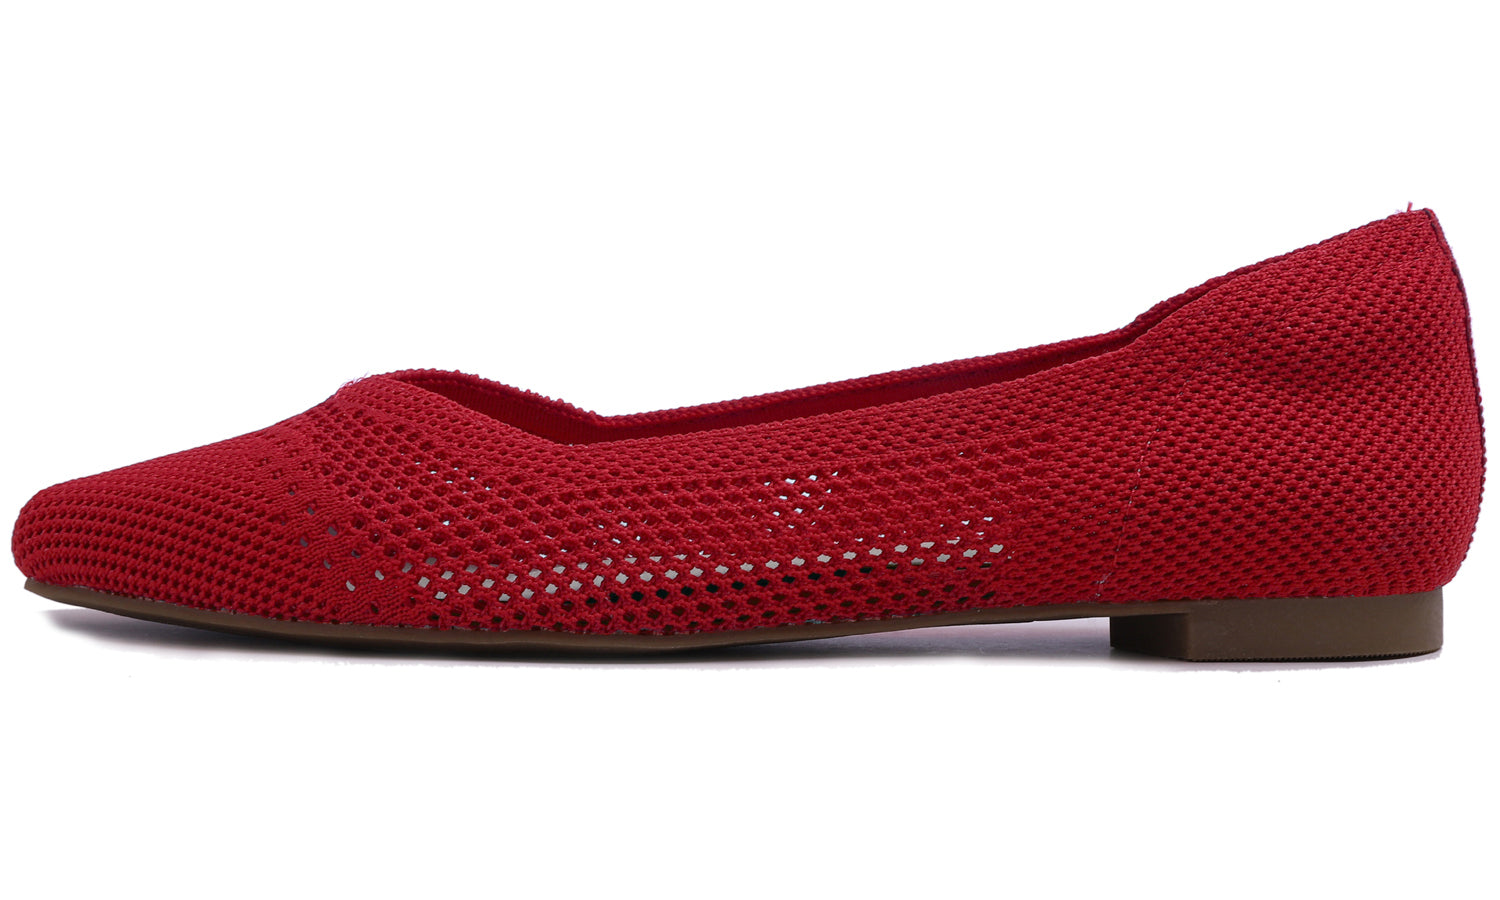 Feversole Women's Woven Fashion Breathable Knit Flat Shoes Pointed Red